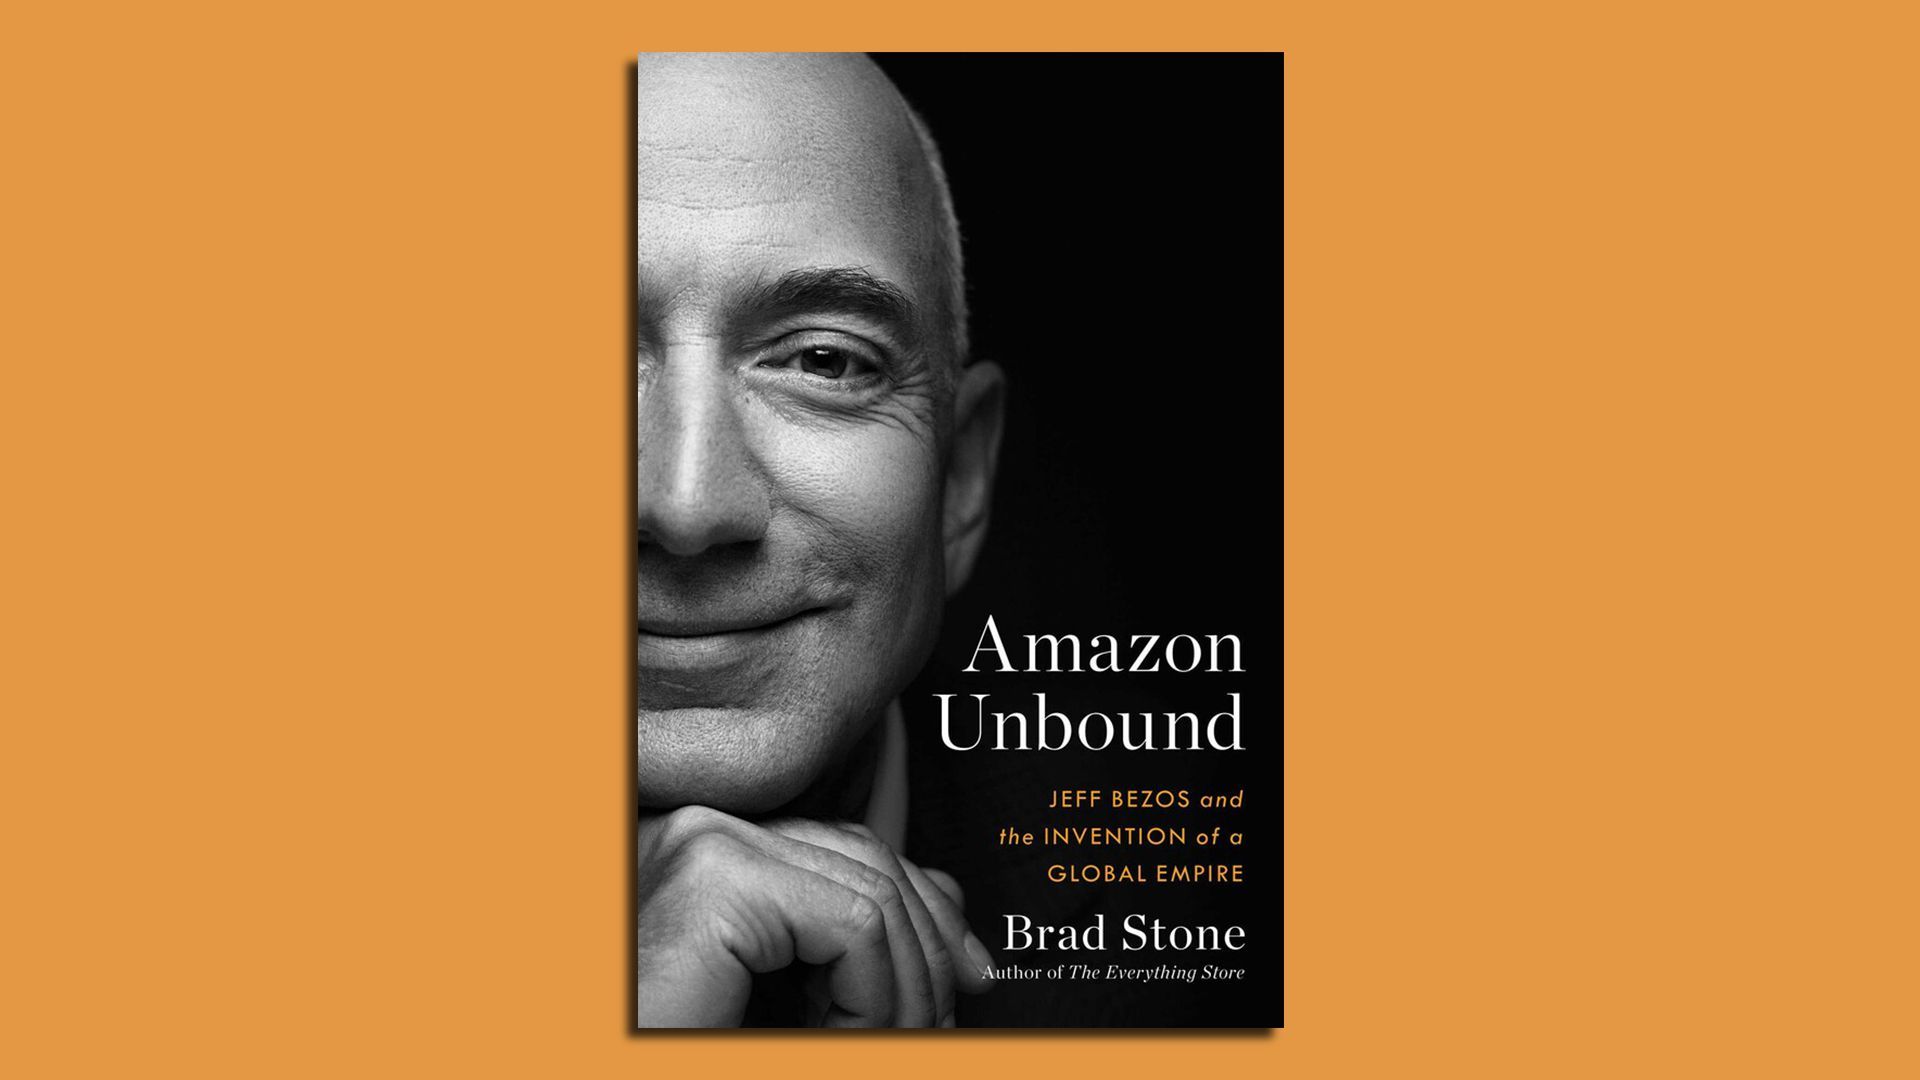 The front cover of “Amazon Unbound” by Brad Stone 